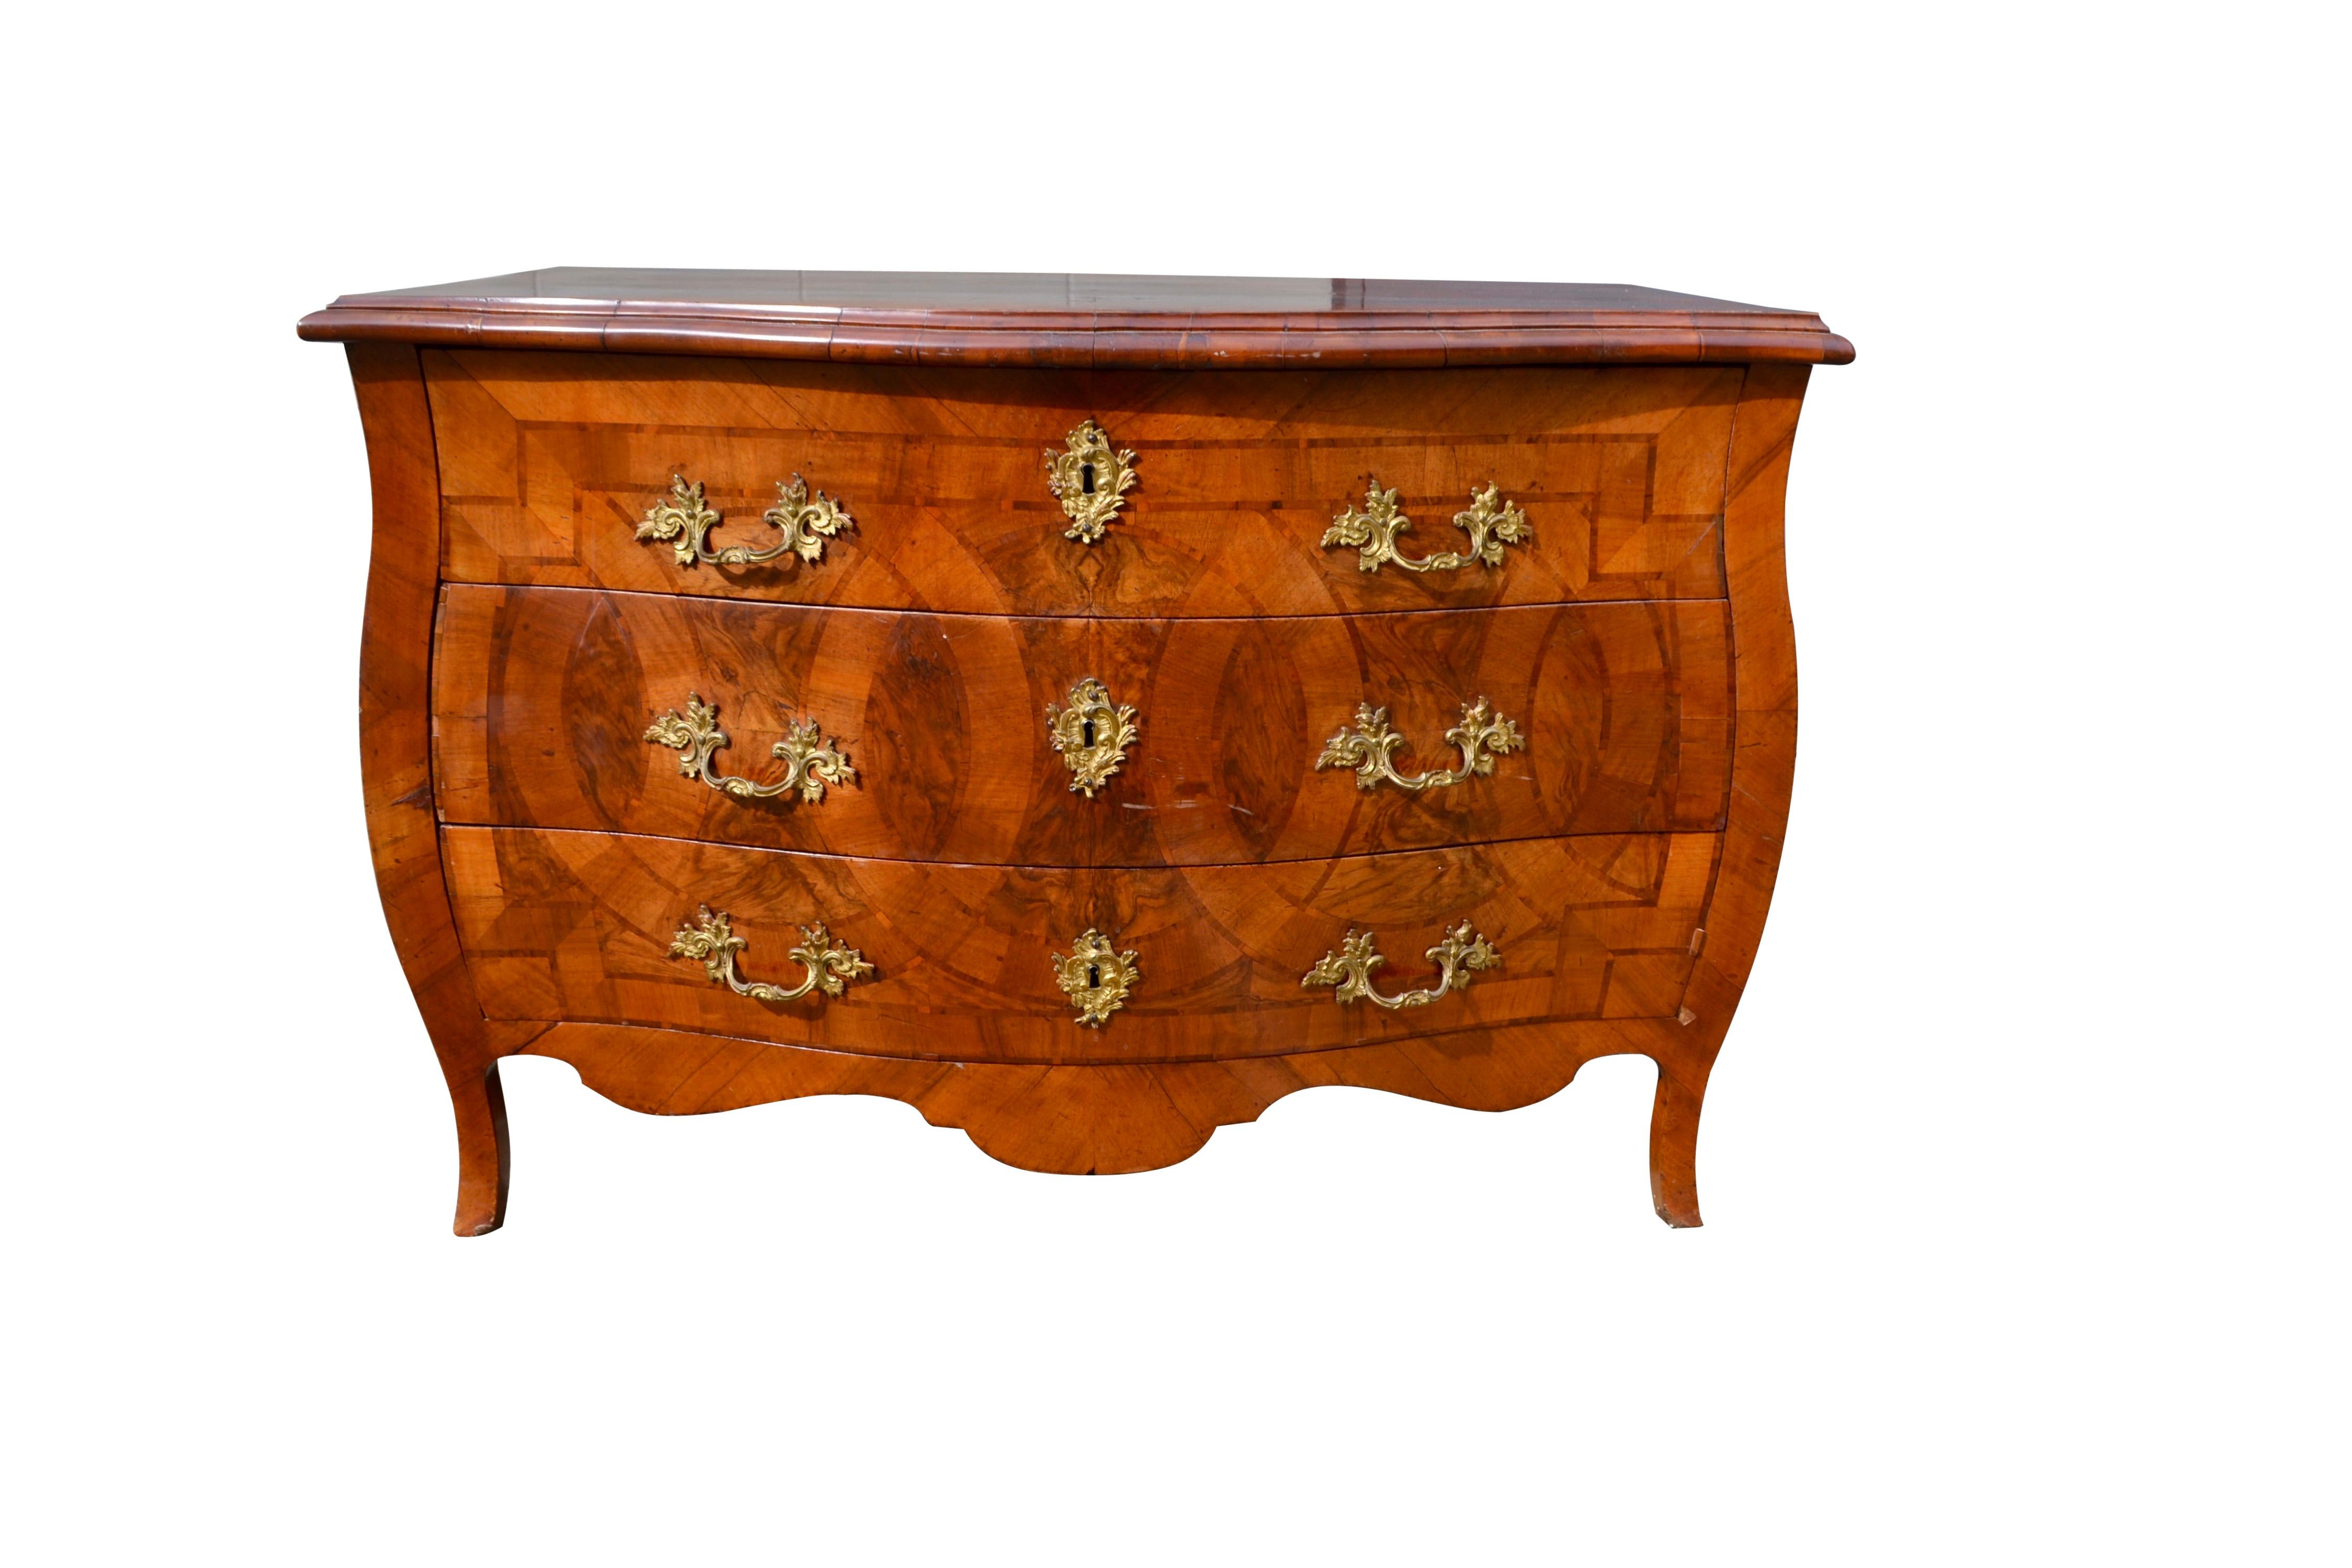 18th Century Italian Louis XV Period Marquetry Bombe Chest of Drawers In Good Condition For Sale In Vancouver, British Columbia